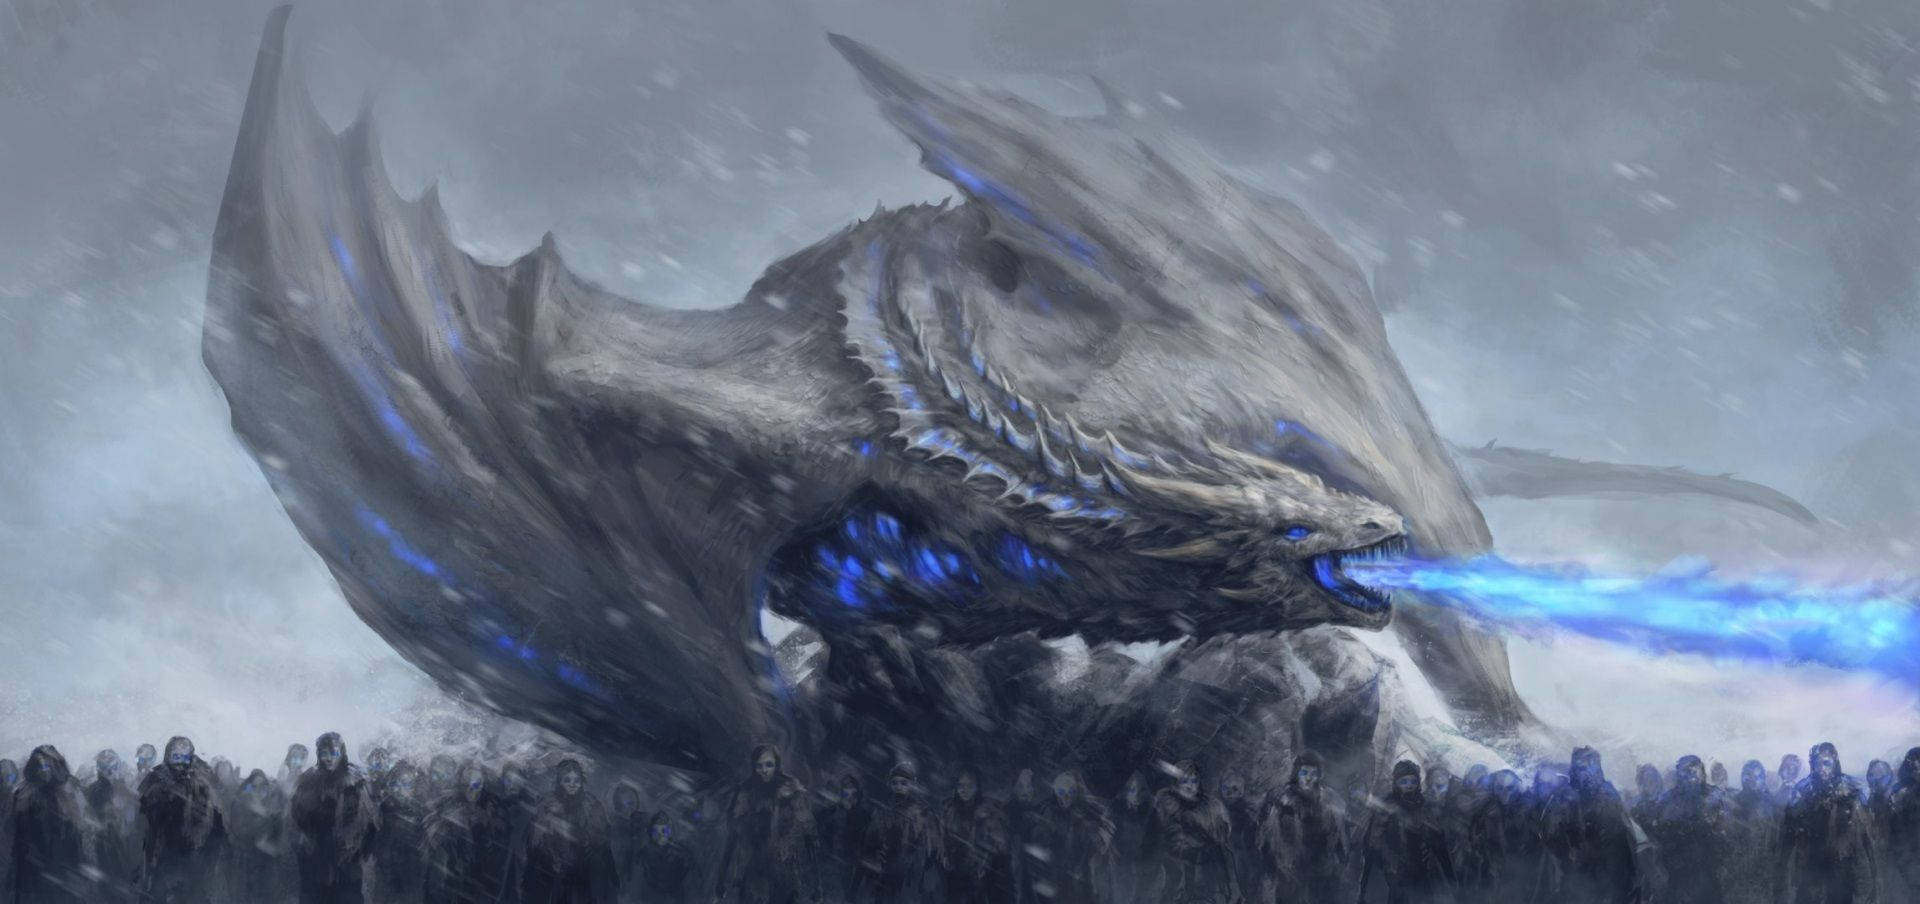 Game Of Thrones Season 8 Viserion Flame Background